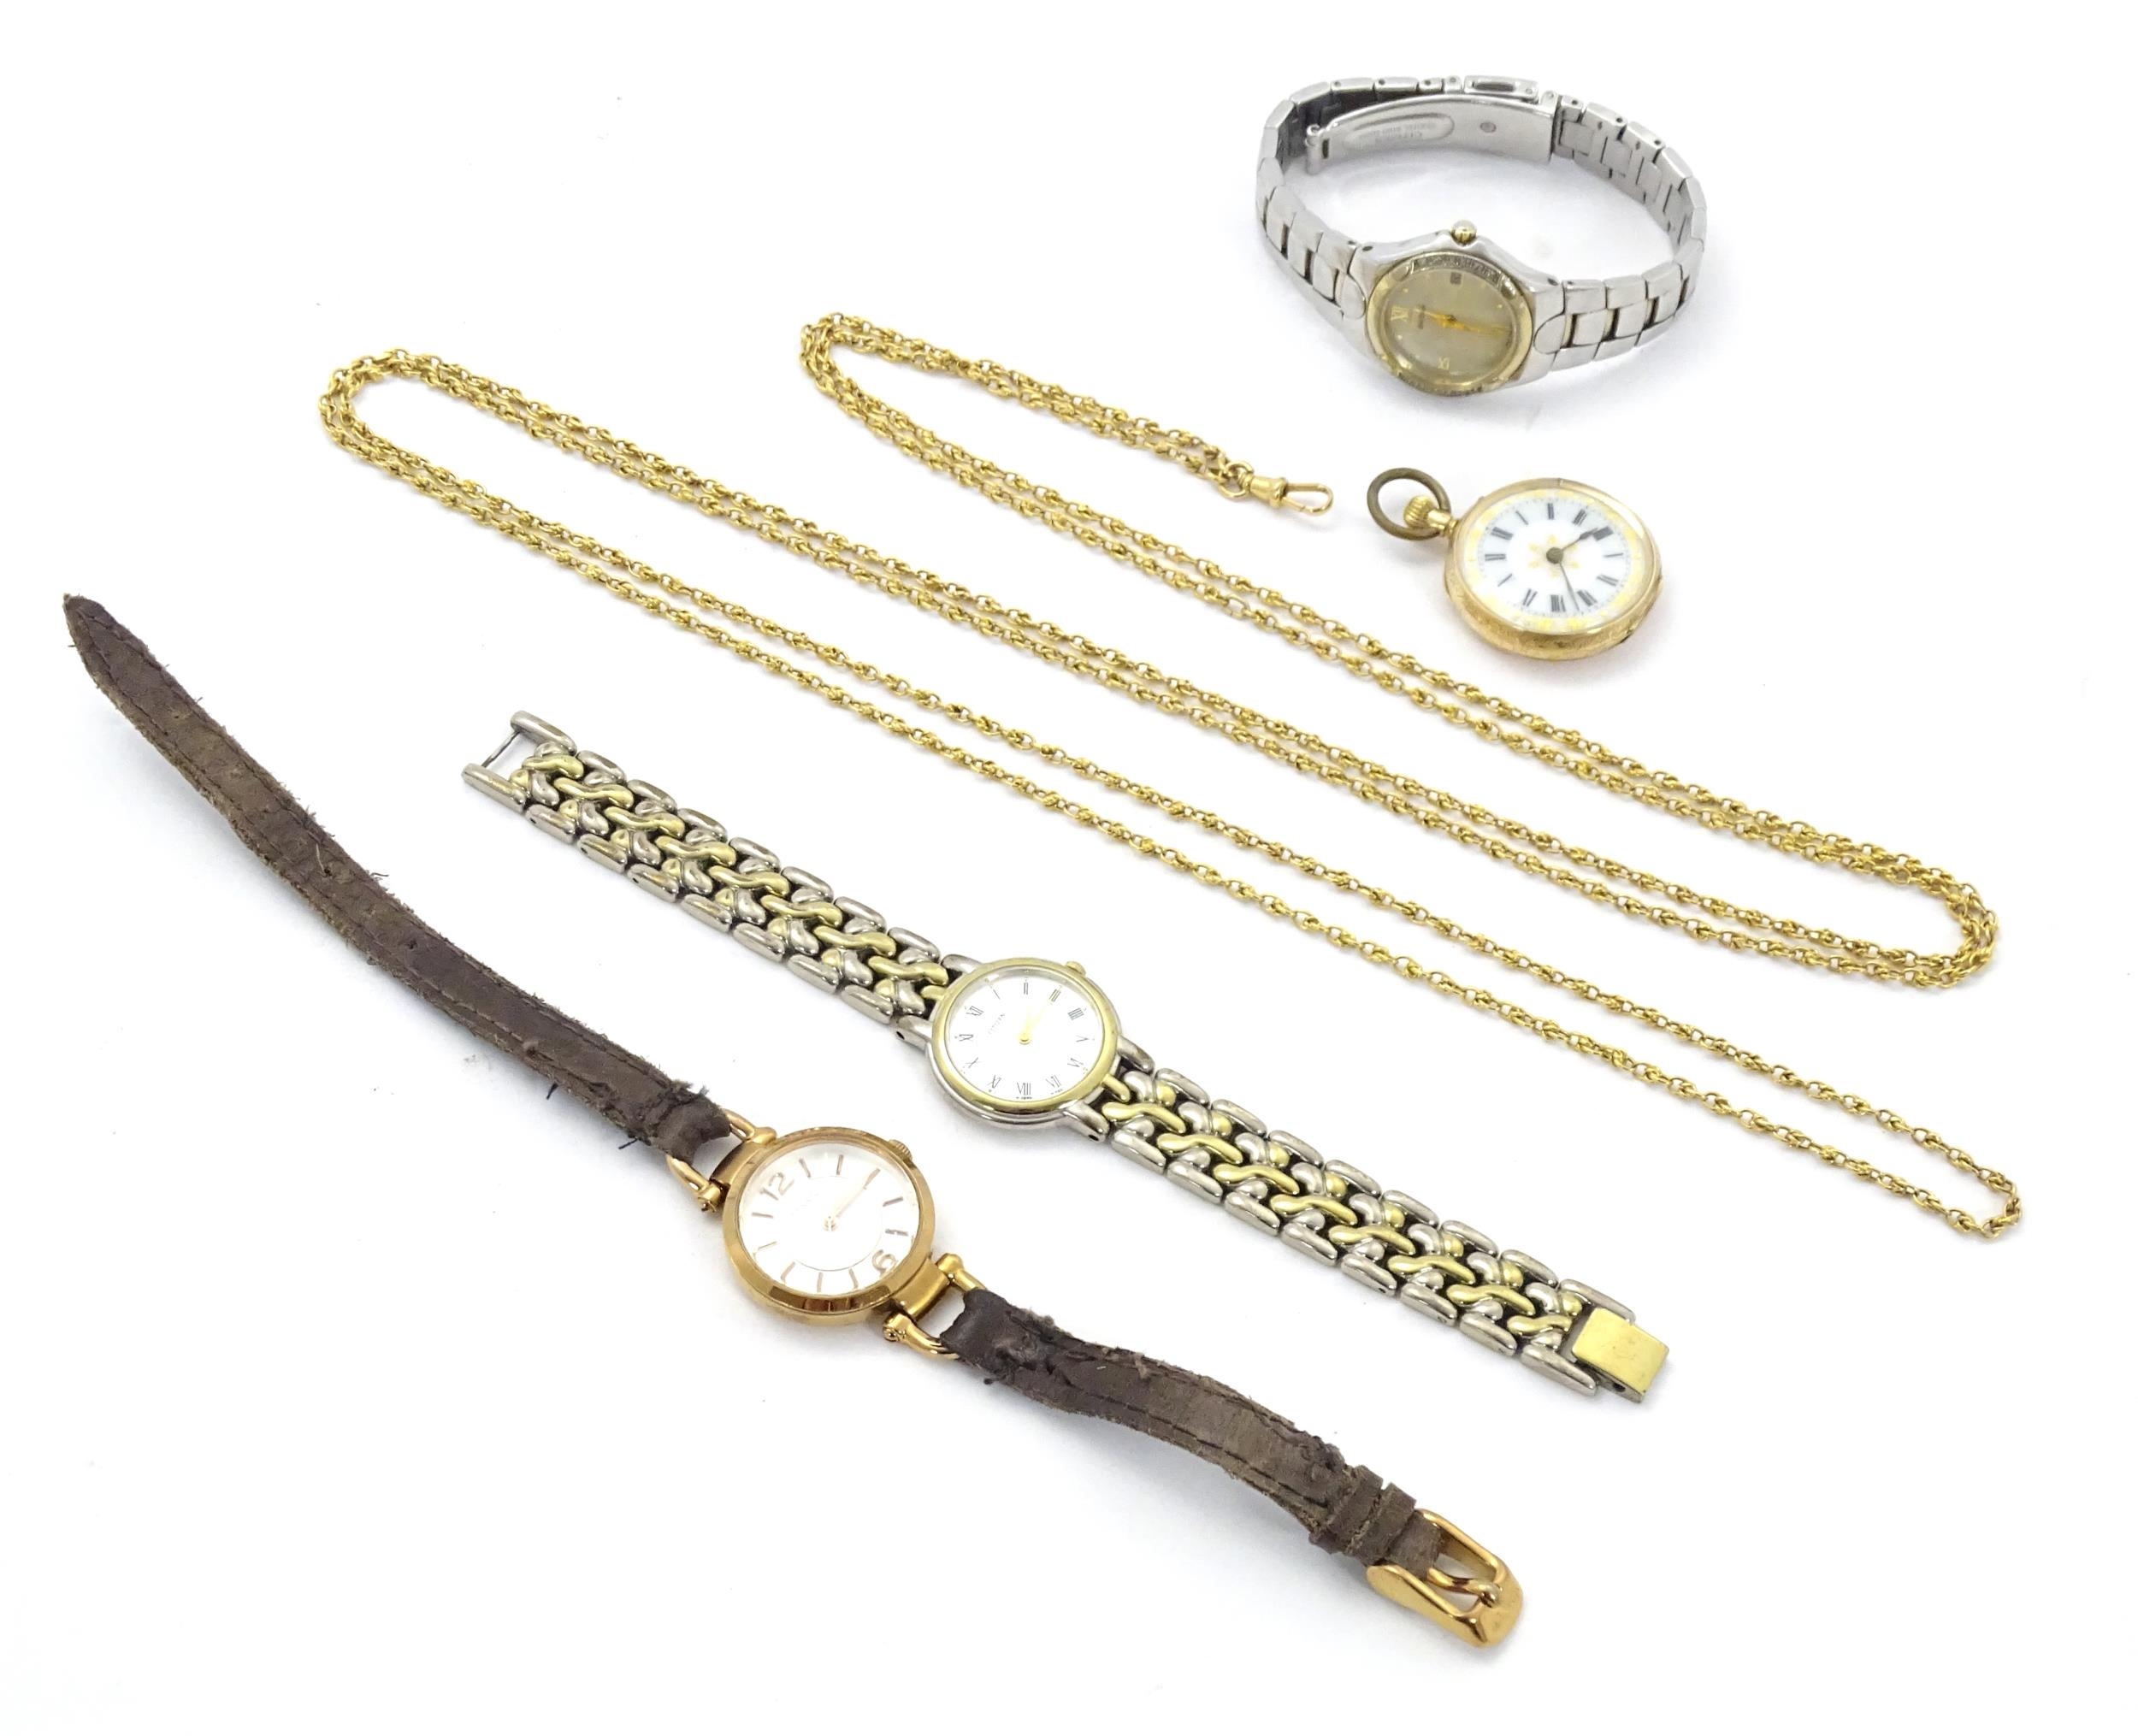 A quantity of quartz movement wrist watches to include two by Citizen, one by Fossil, and a fob - Image 2 of 32